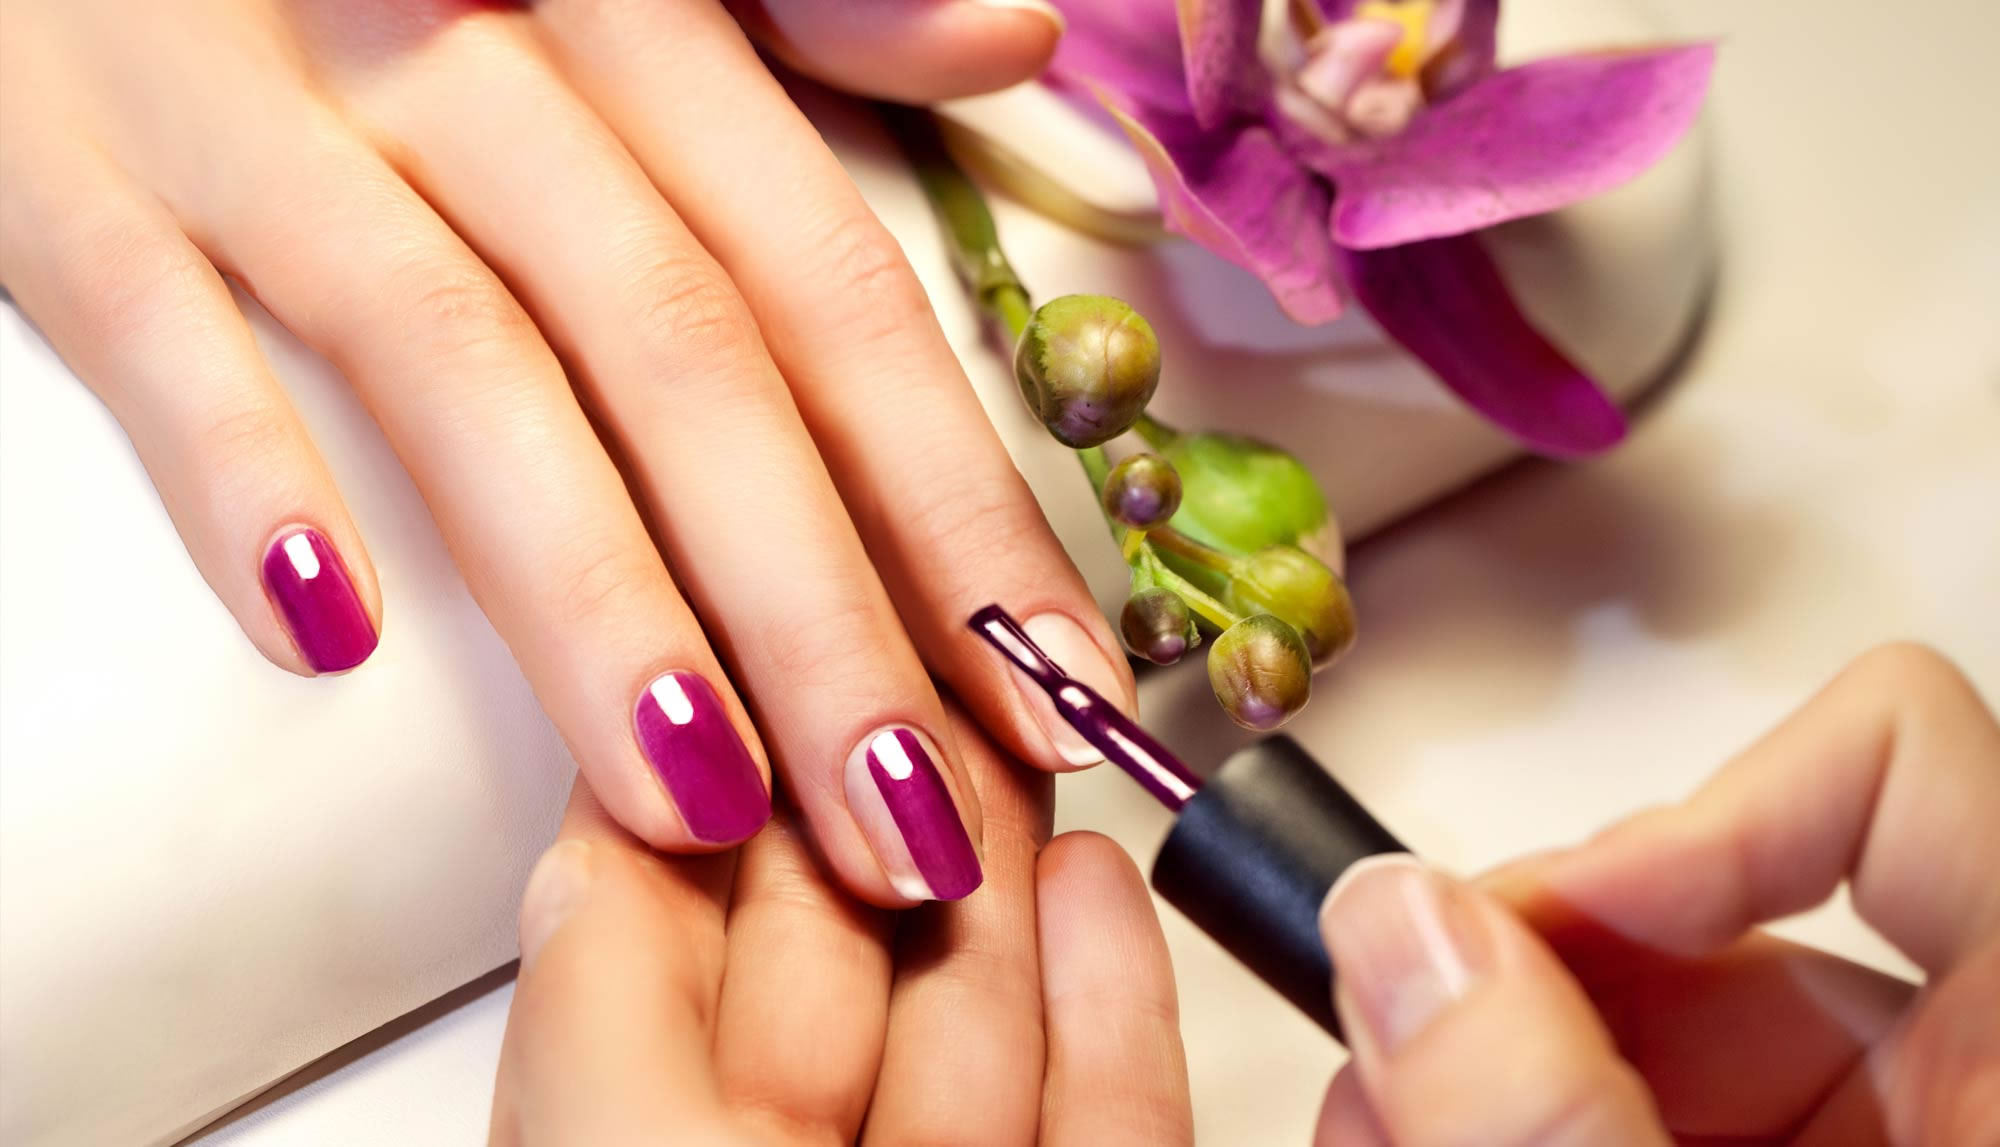 5. Japanese Nail Art Supplies You Need for At-Home Manicures - wide 7